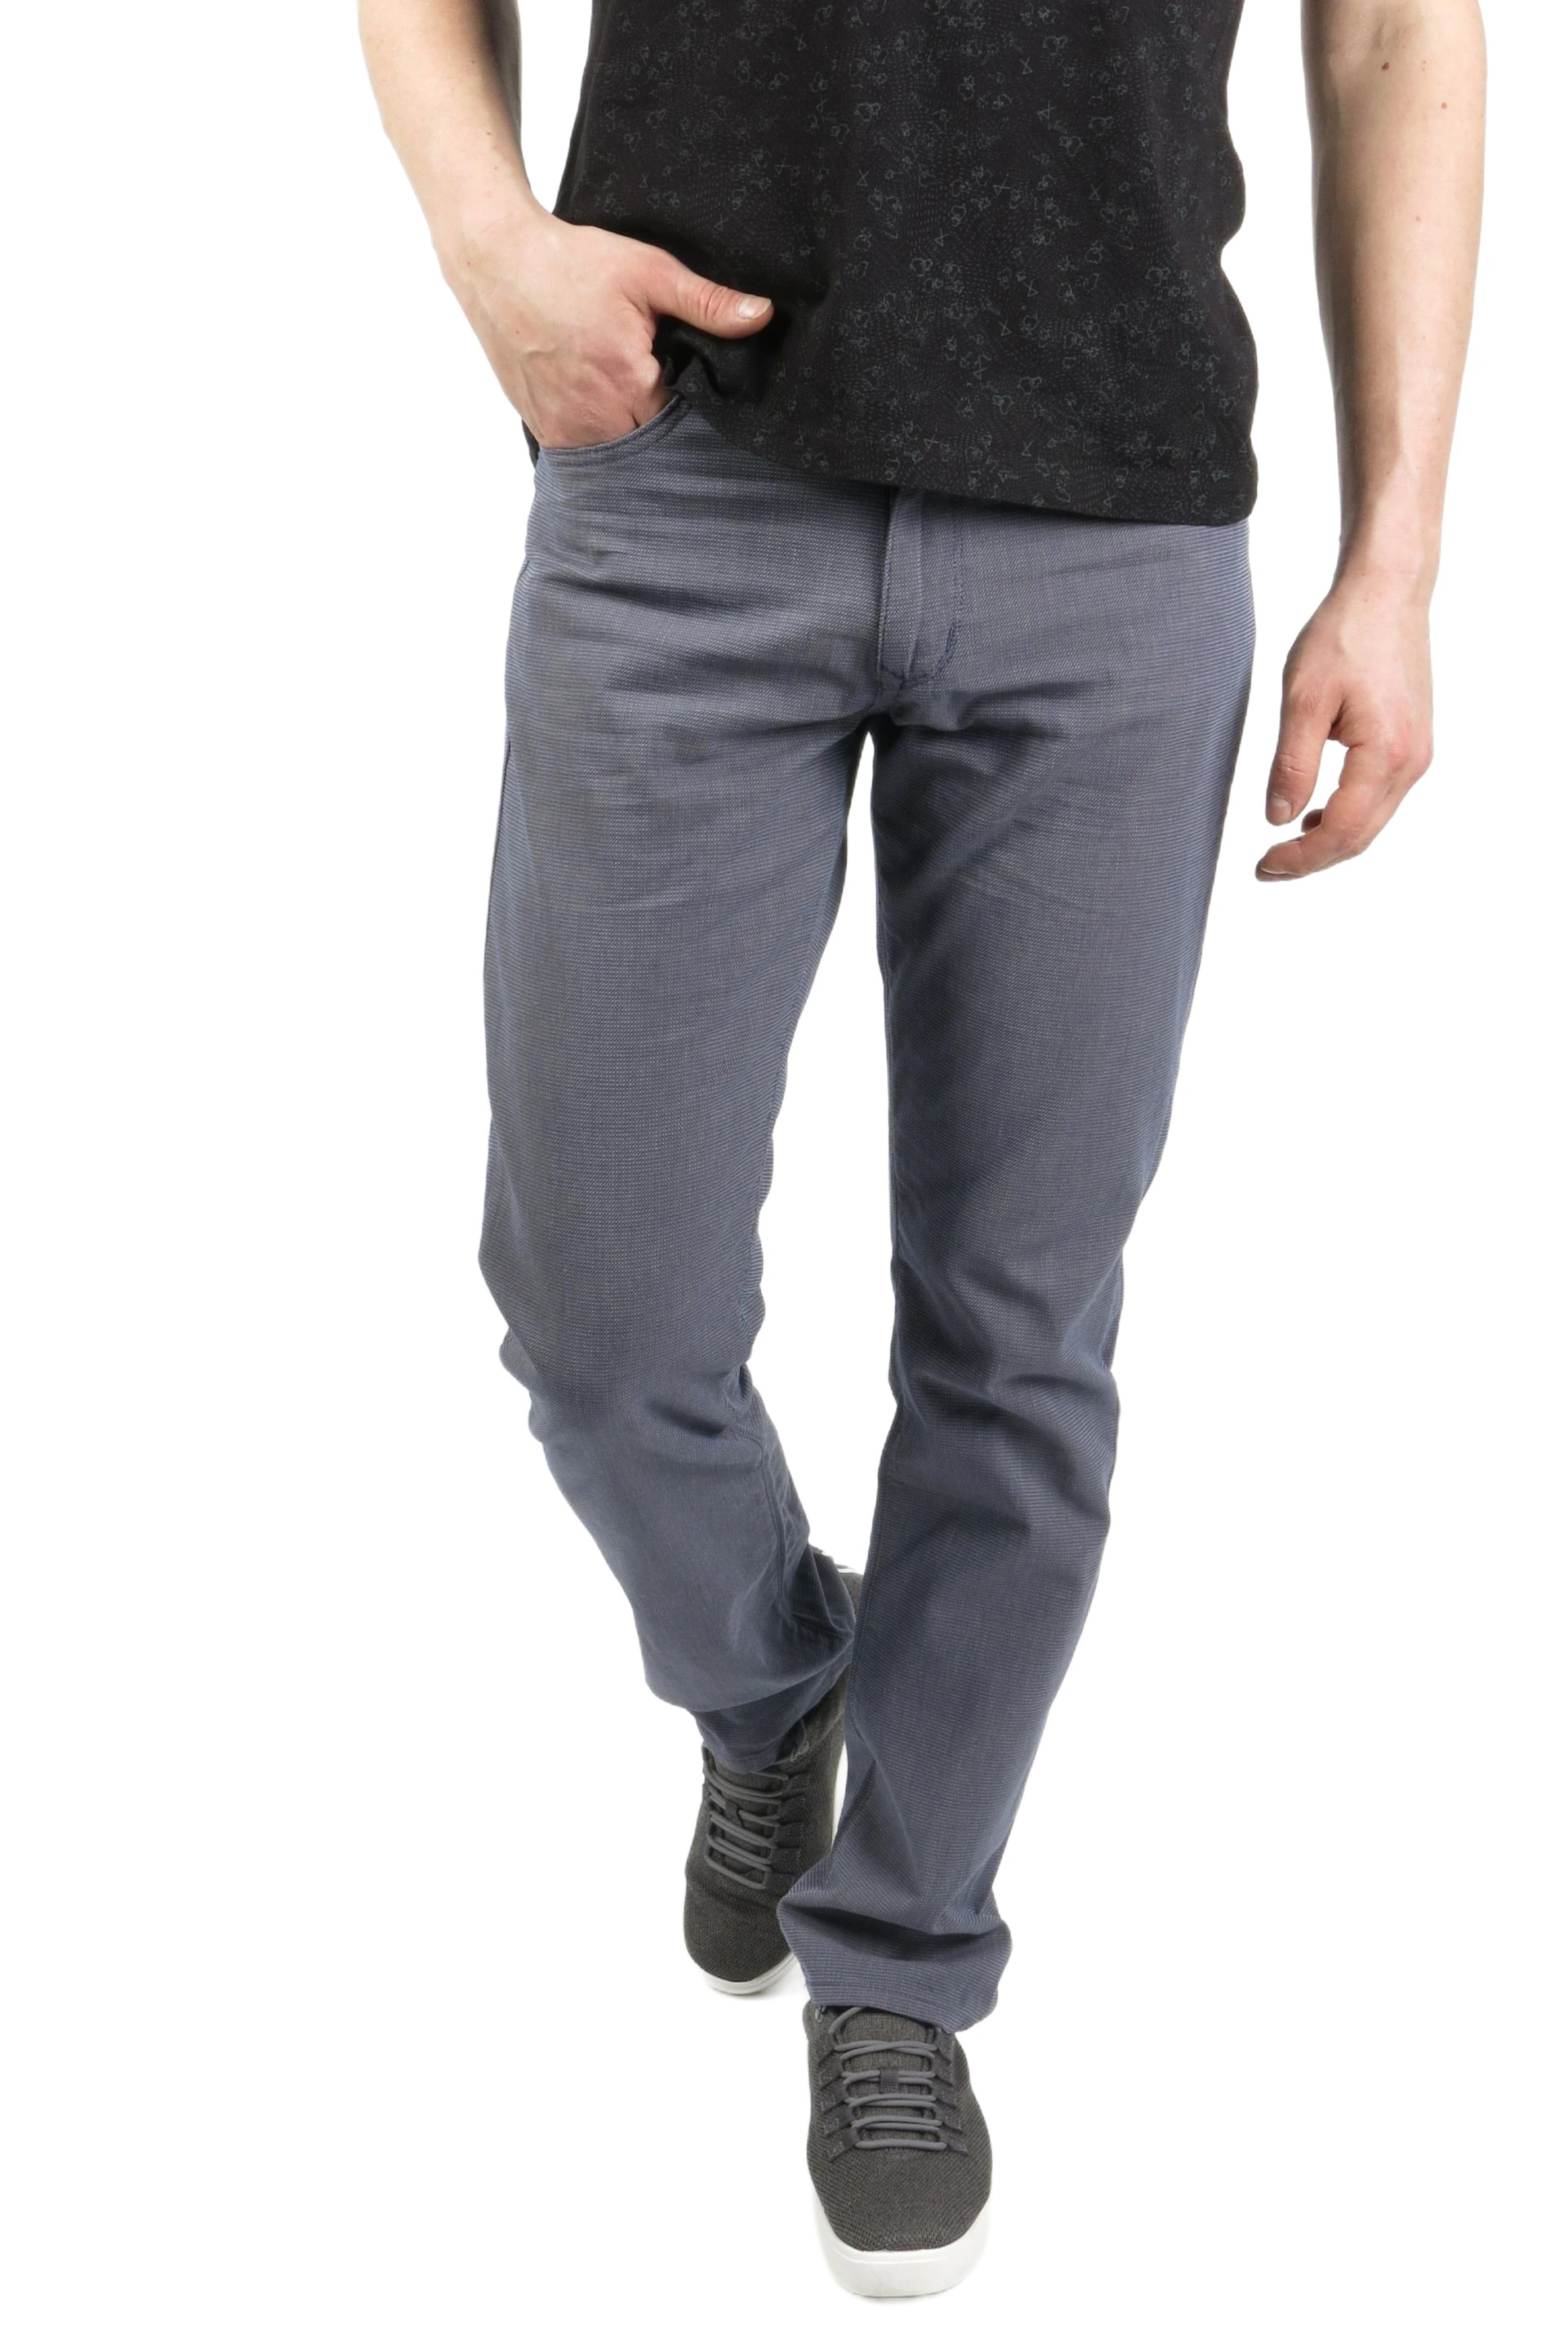 Chino pants BLK JEANS 7898-178-105-201